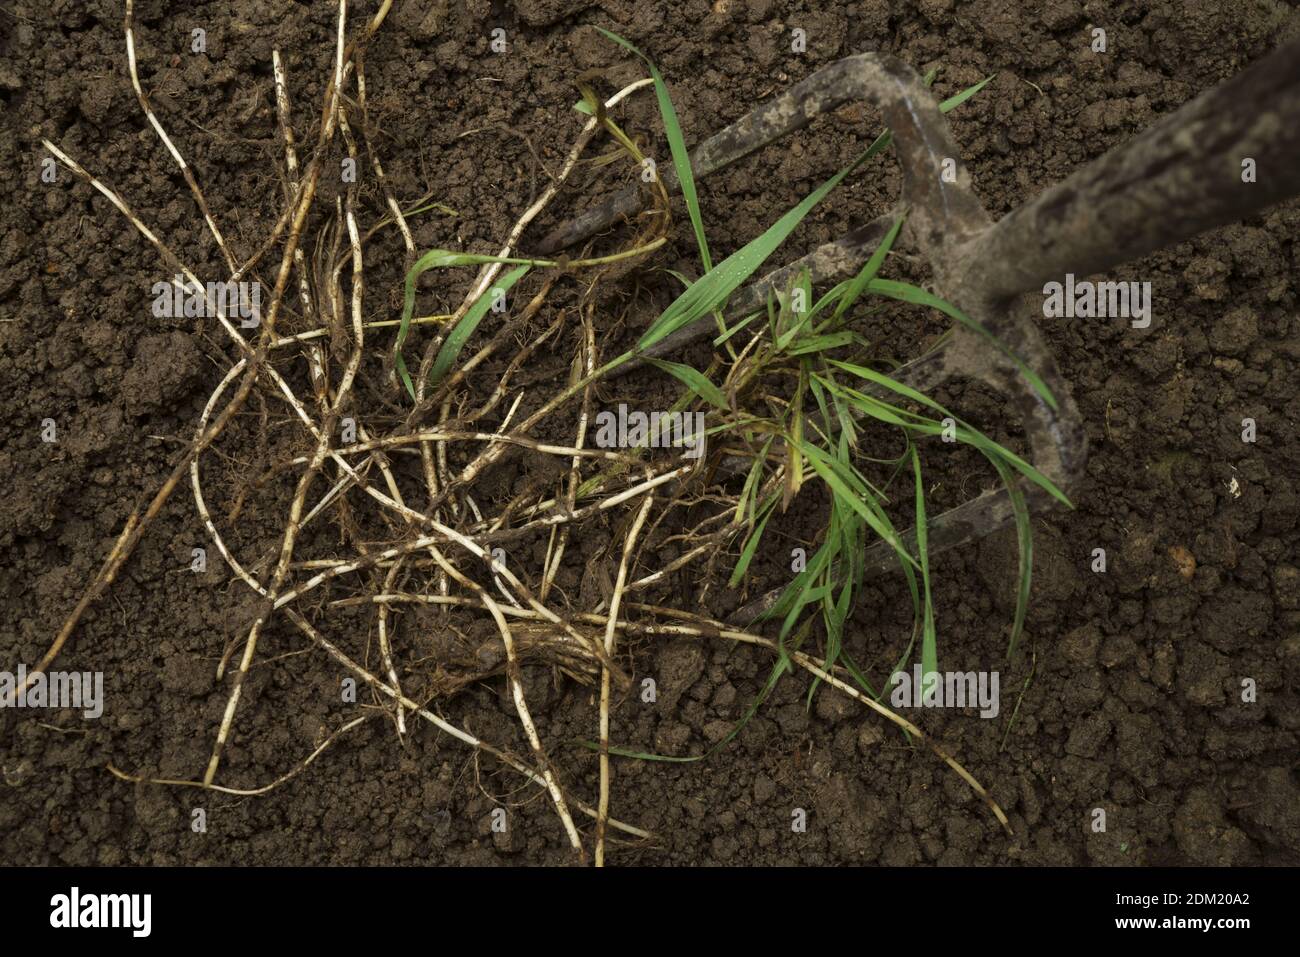 Couch grass rhizomes on soil with a garden fork. Stock Photo